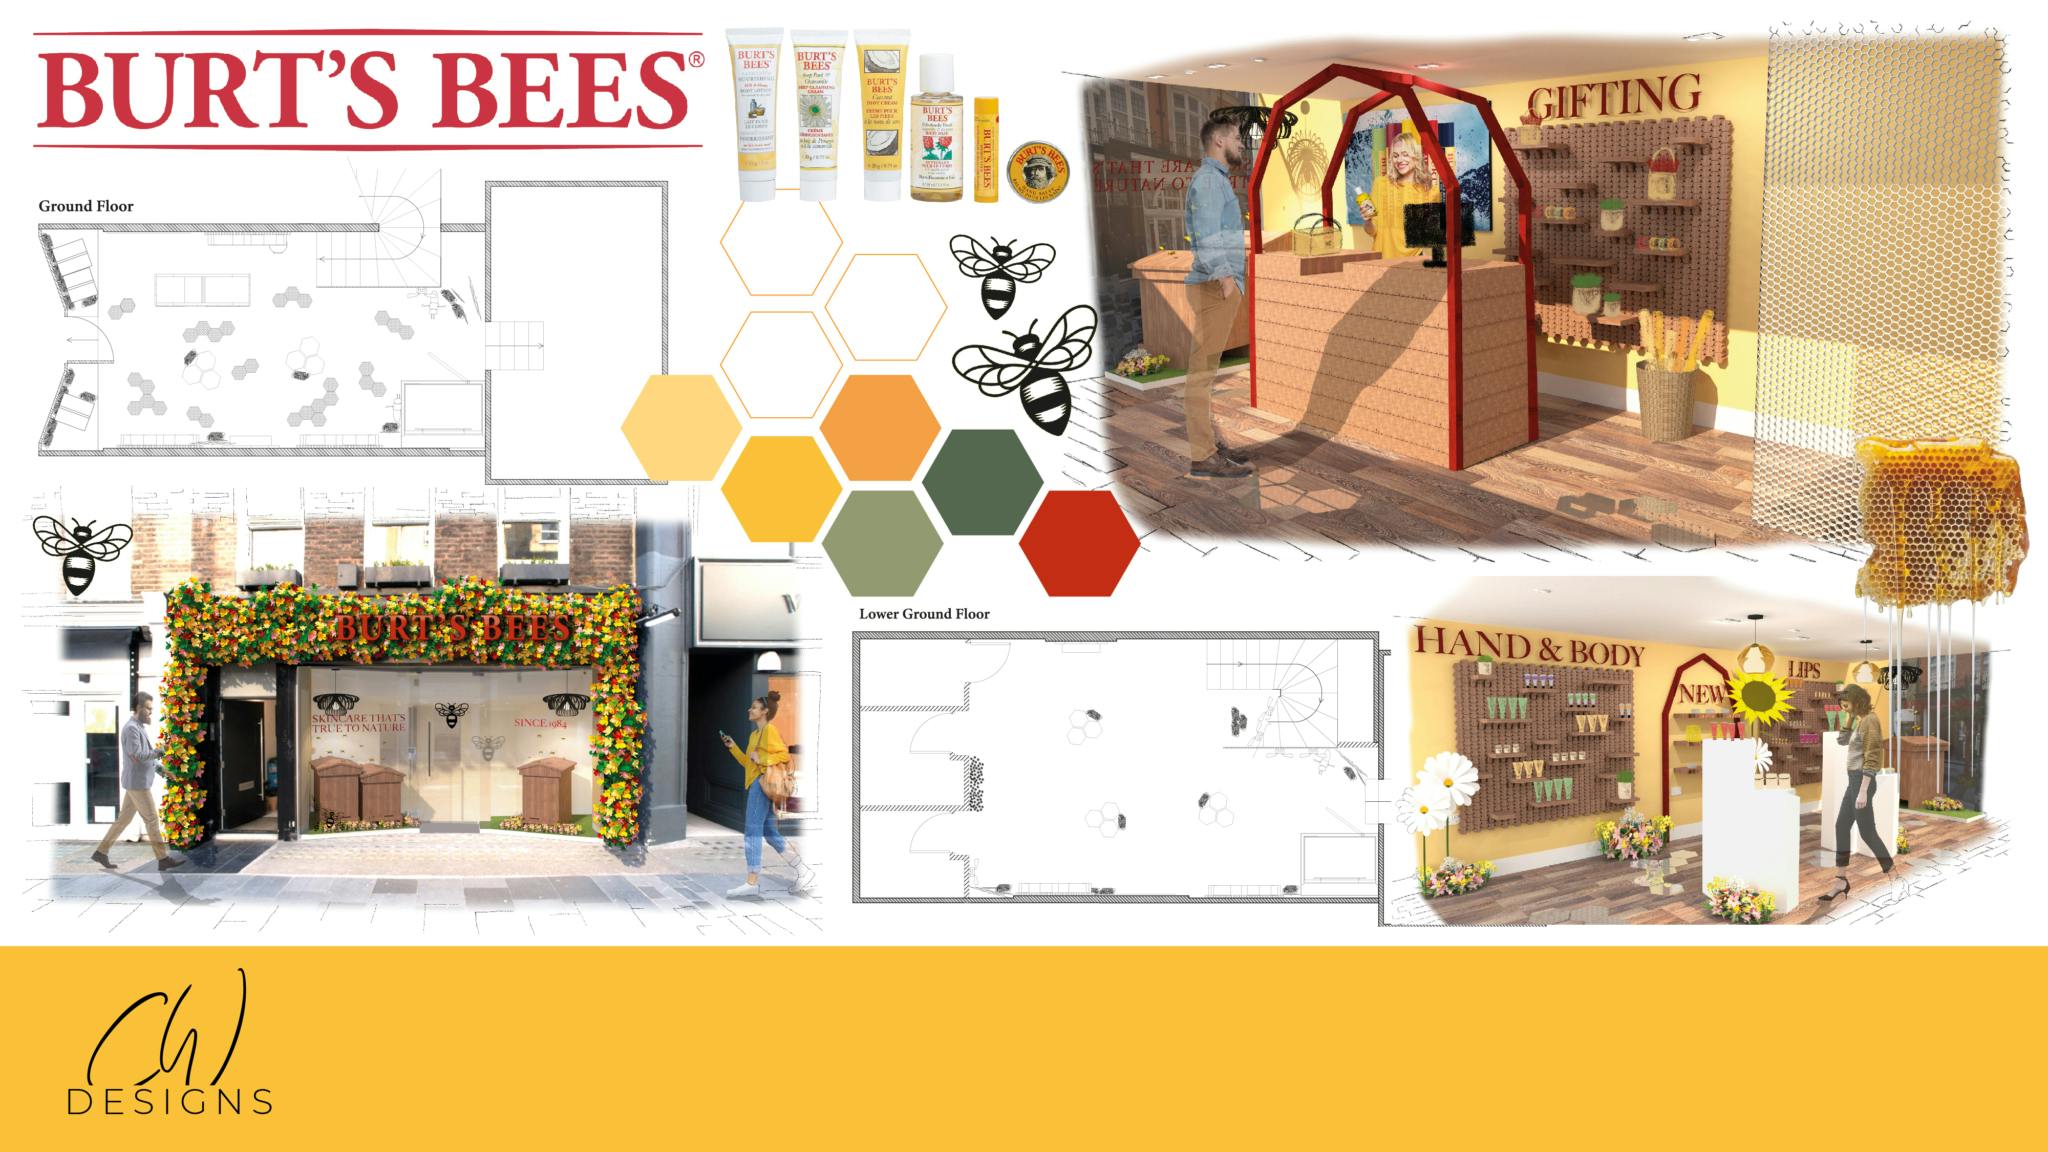 Plymouth College of Art graduating Interiors student Chloe Wickham mood board for final major project featuring Burts Bees, interior and exterior shots, coloured hexagons, floor plans and products in autumnal tones